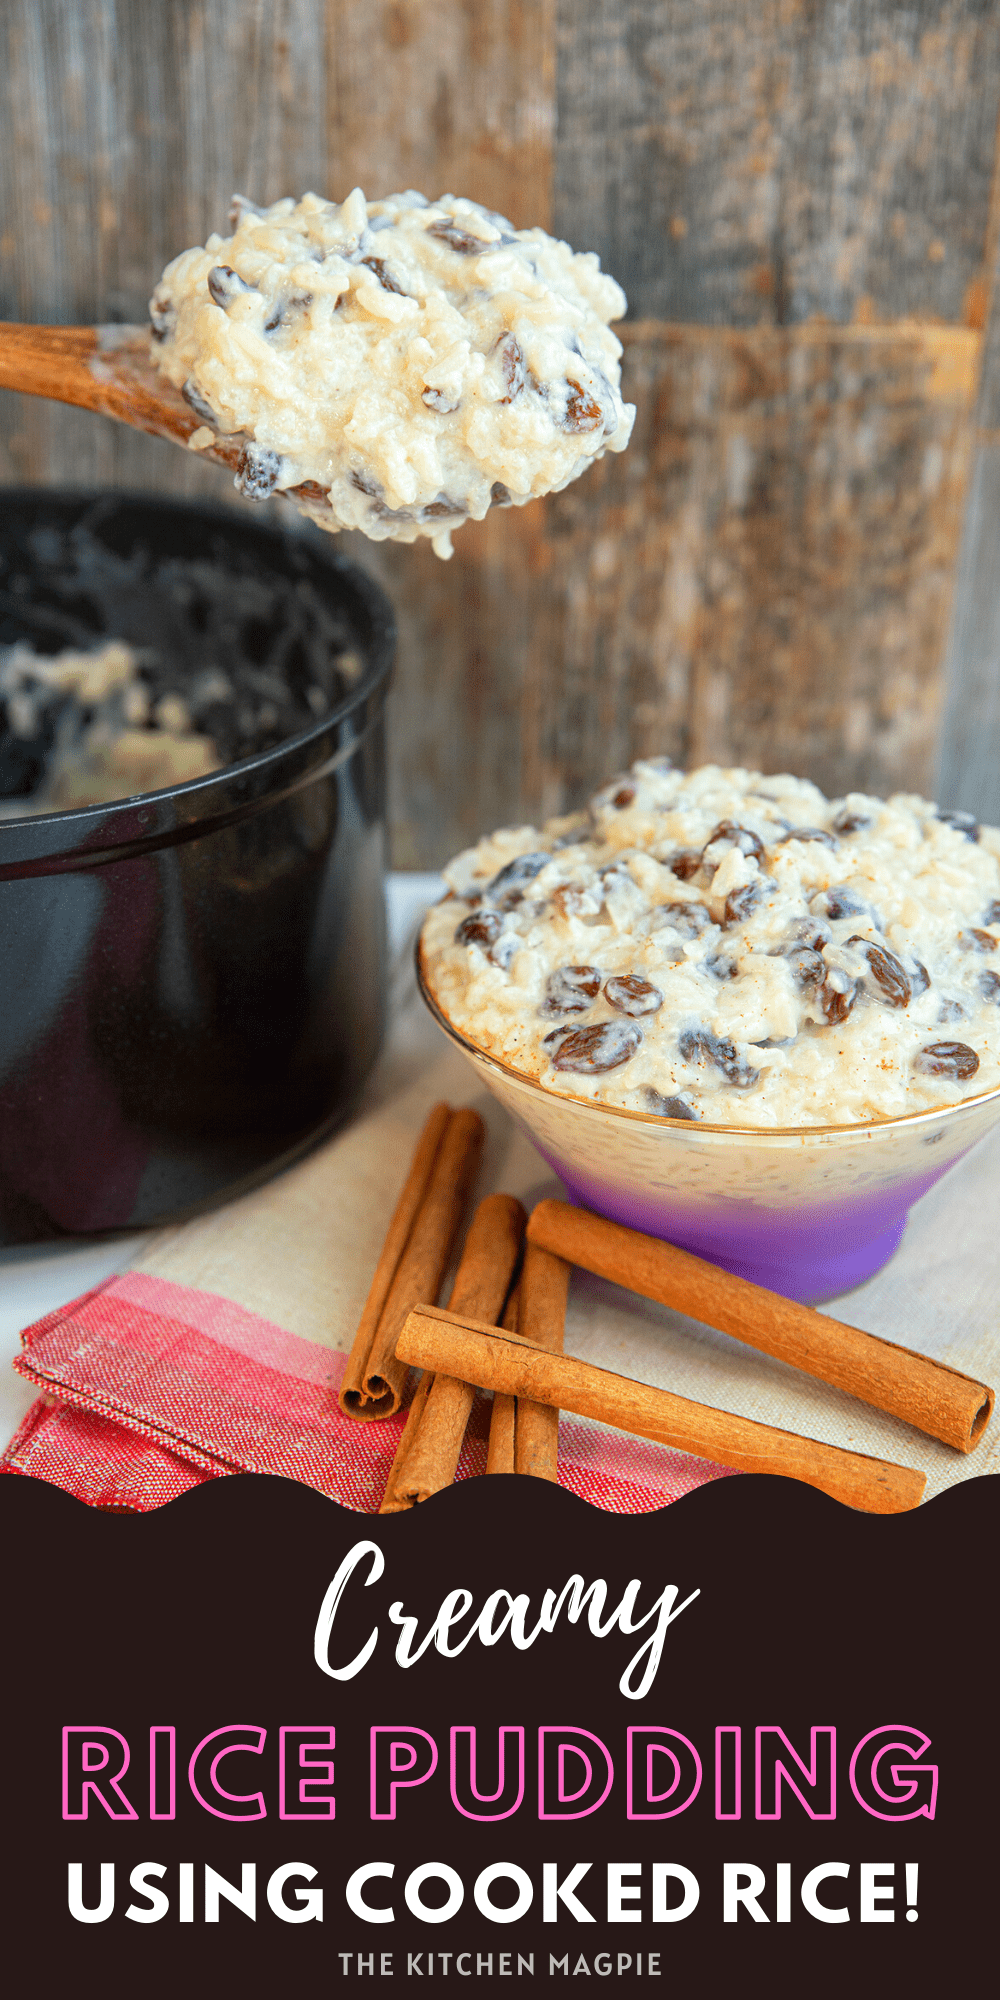 How to make rice pudding with cooked rice! This recipe yields a creamy, sweet rice pudding that is perfect for when you have leftover rice in the fridge. 